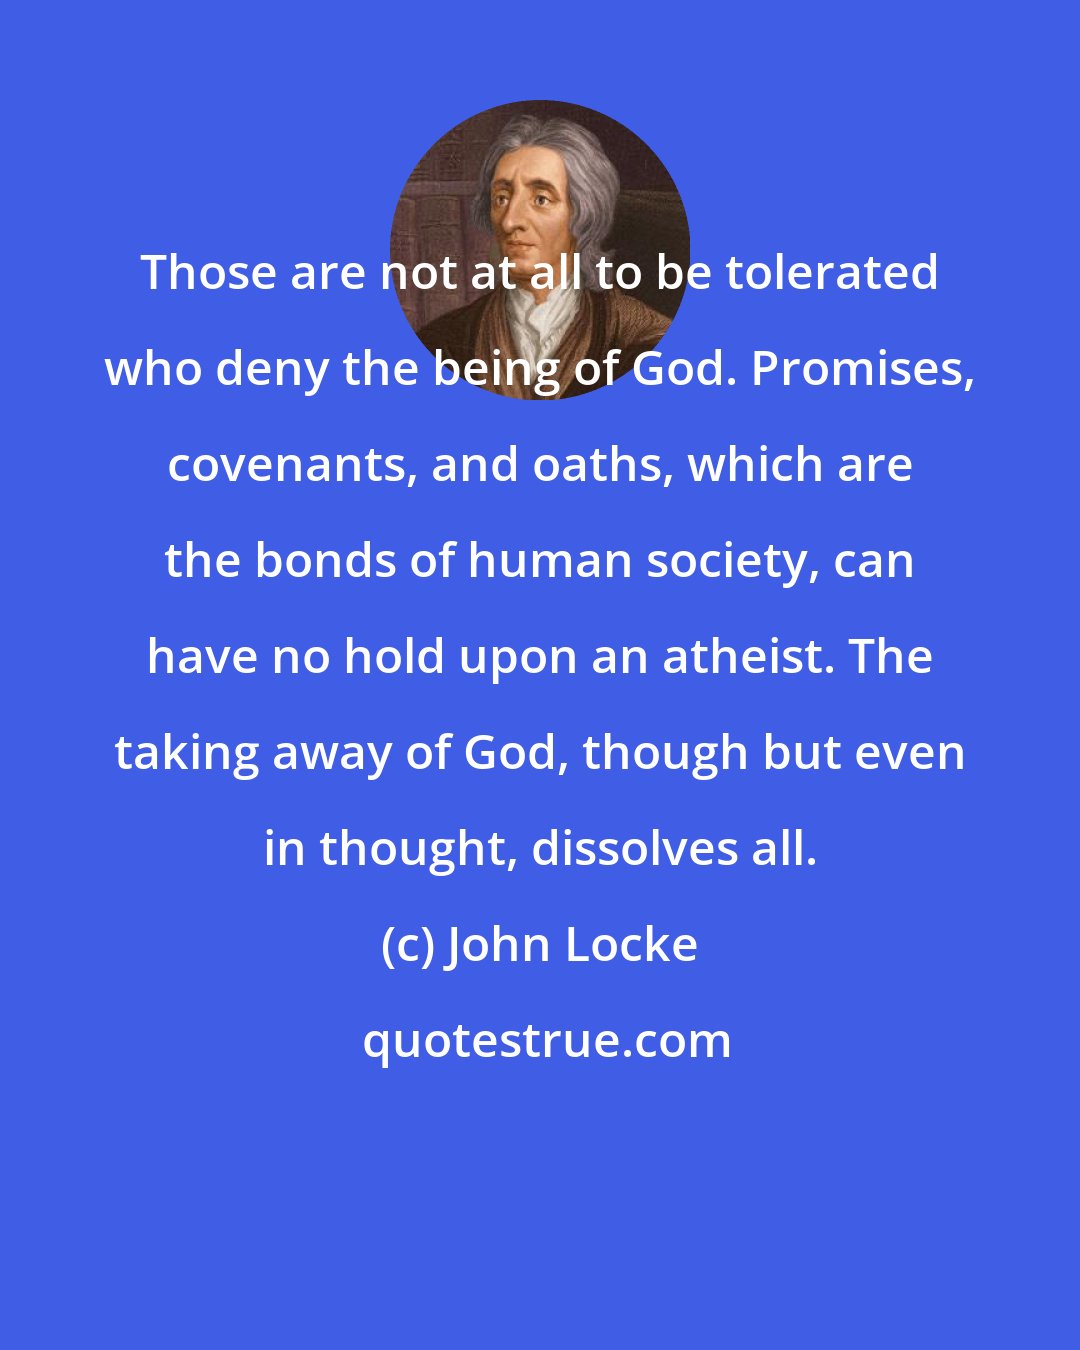 John Locke: Those are not at all to be tolerated who deny the being of God. Promises, covenants, and oaths, which are the bonds of human society, can have no hold upon an atheist. The taking away of God, though but even in thought, dissolves all.